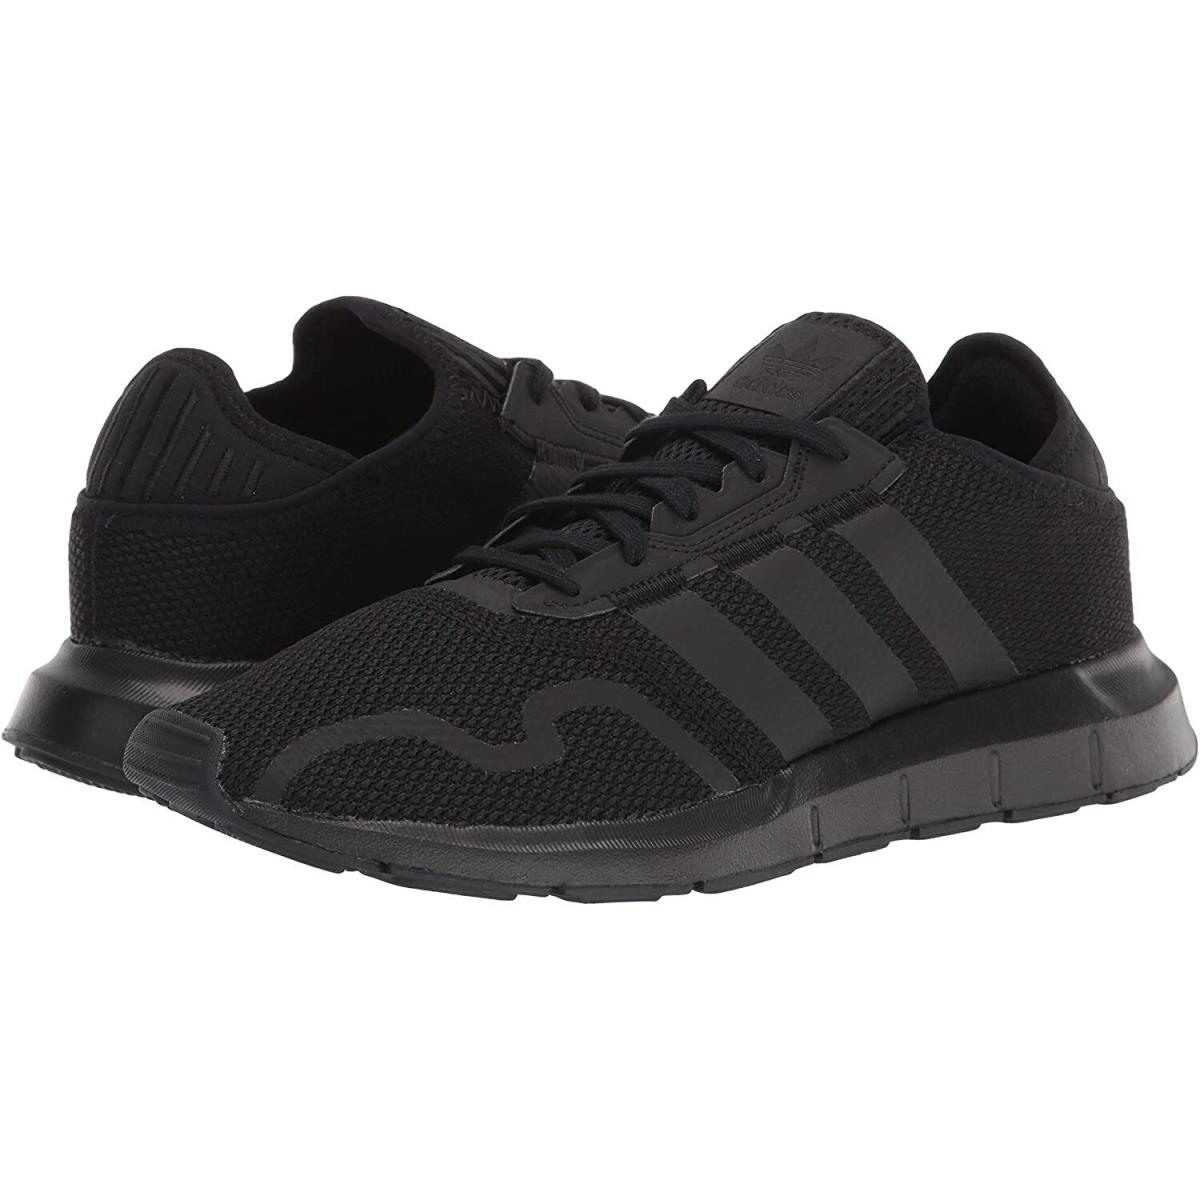 Men`s Shoes Adidas Swift Run X Casual Athletic Sneakers FY2116 Black